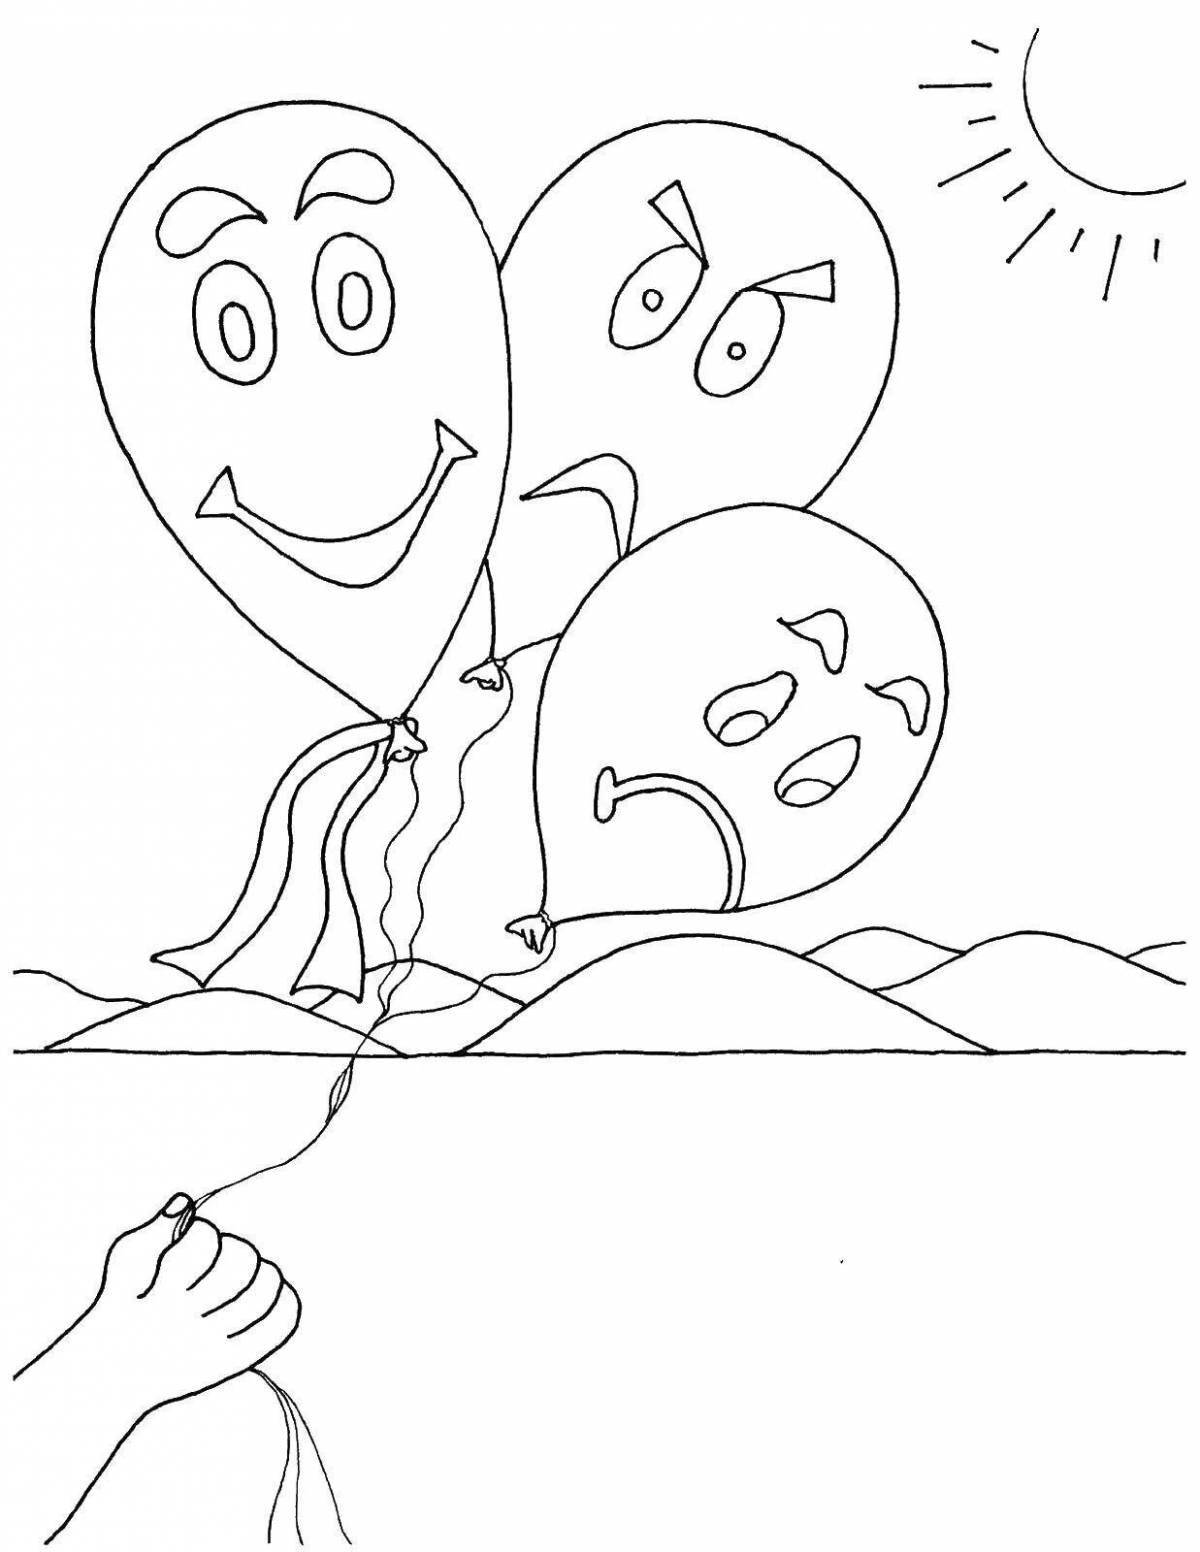 Fun coloring pages of emotions for preschoolers